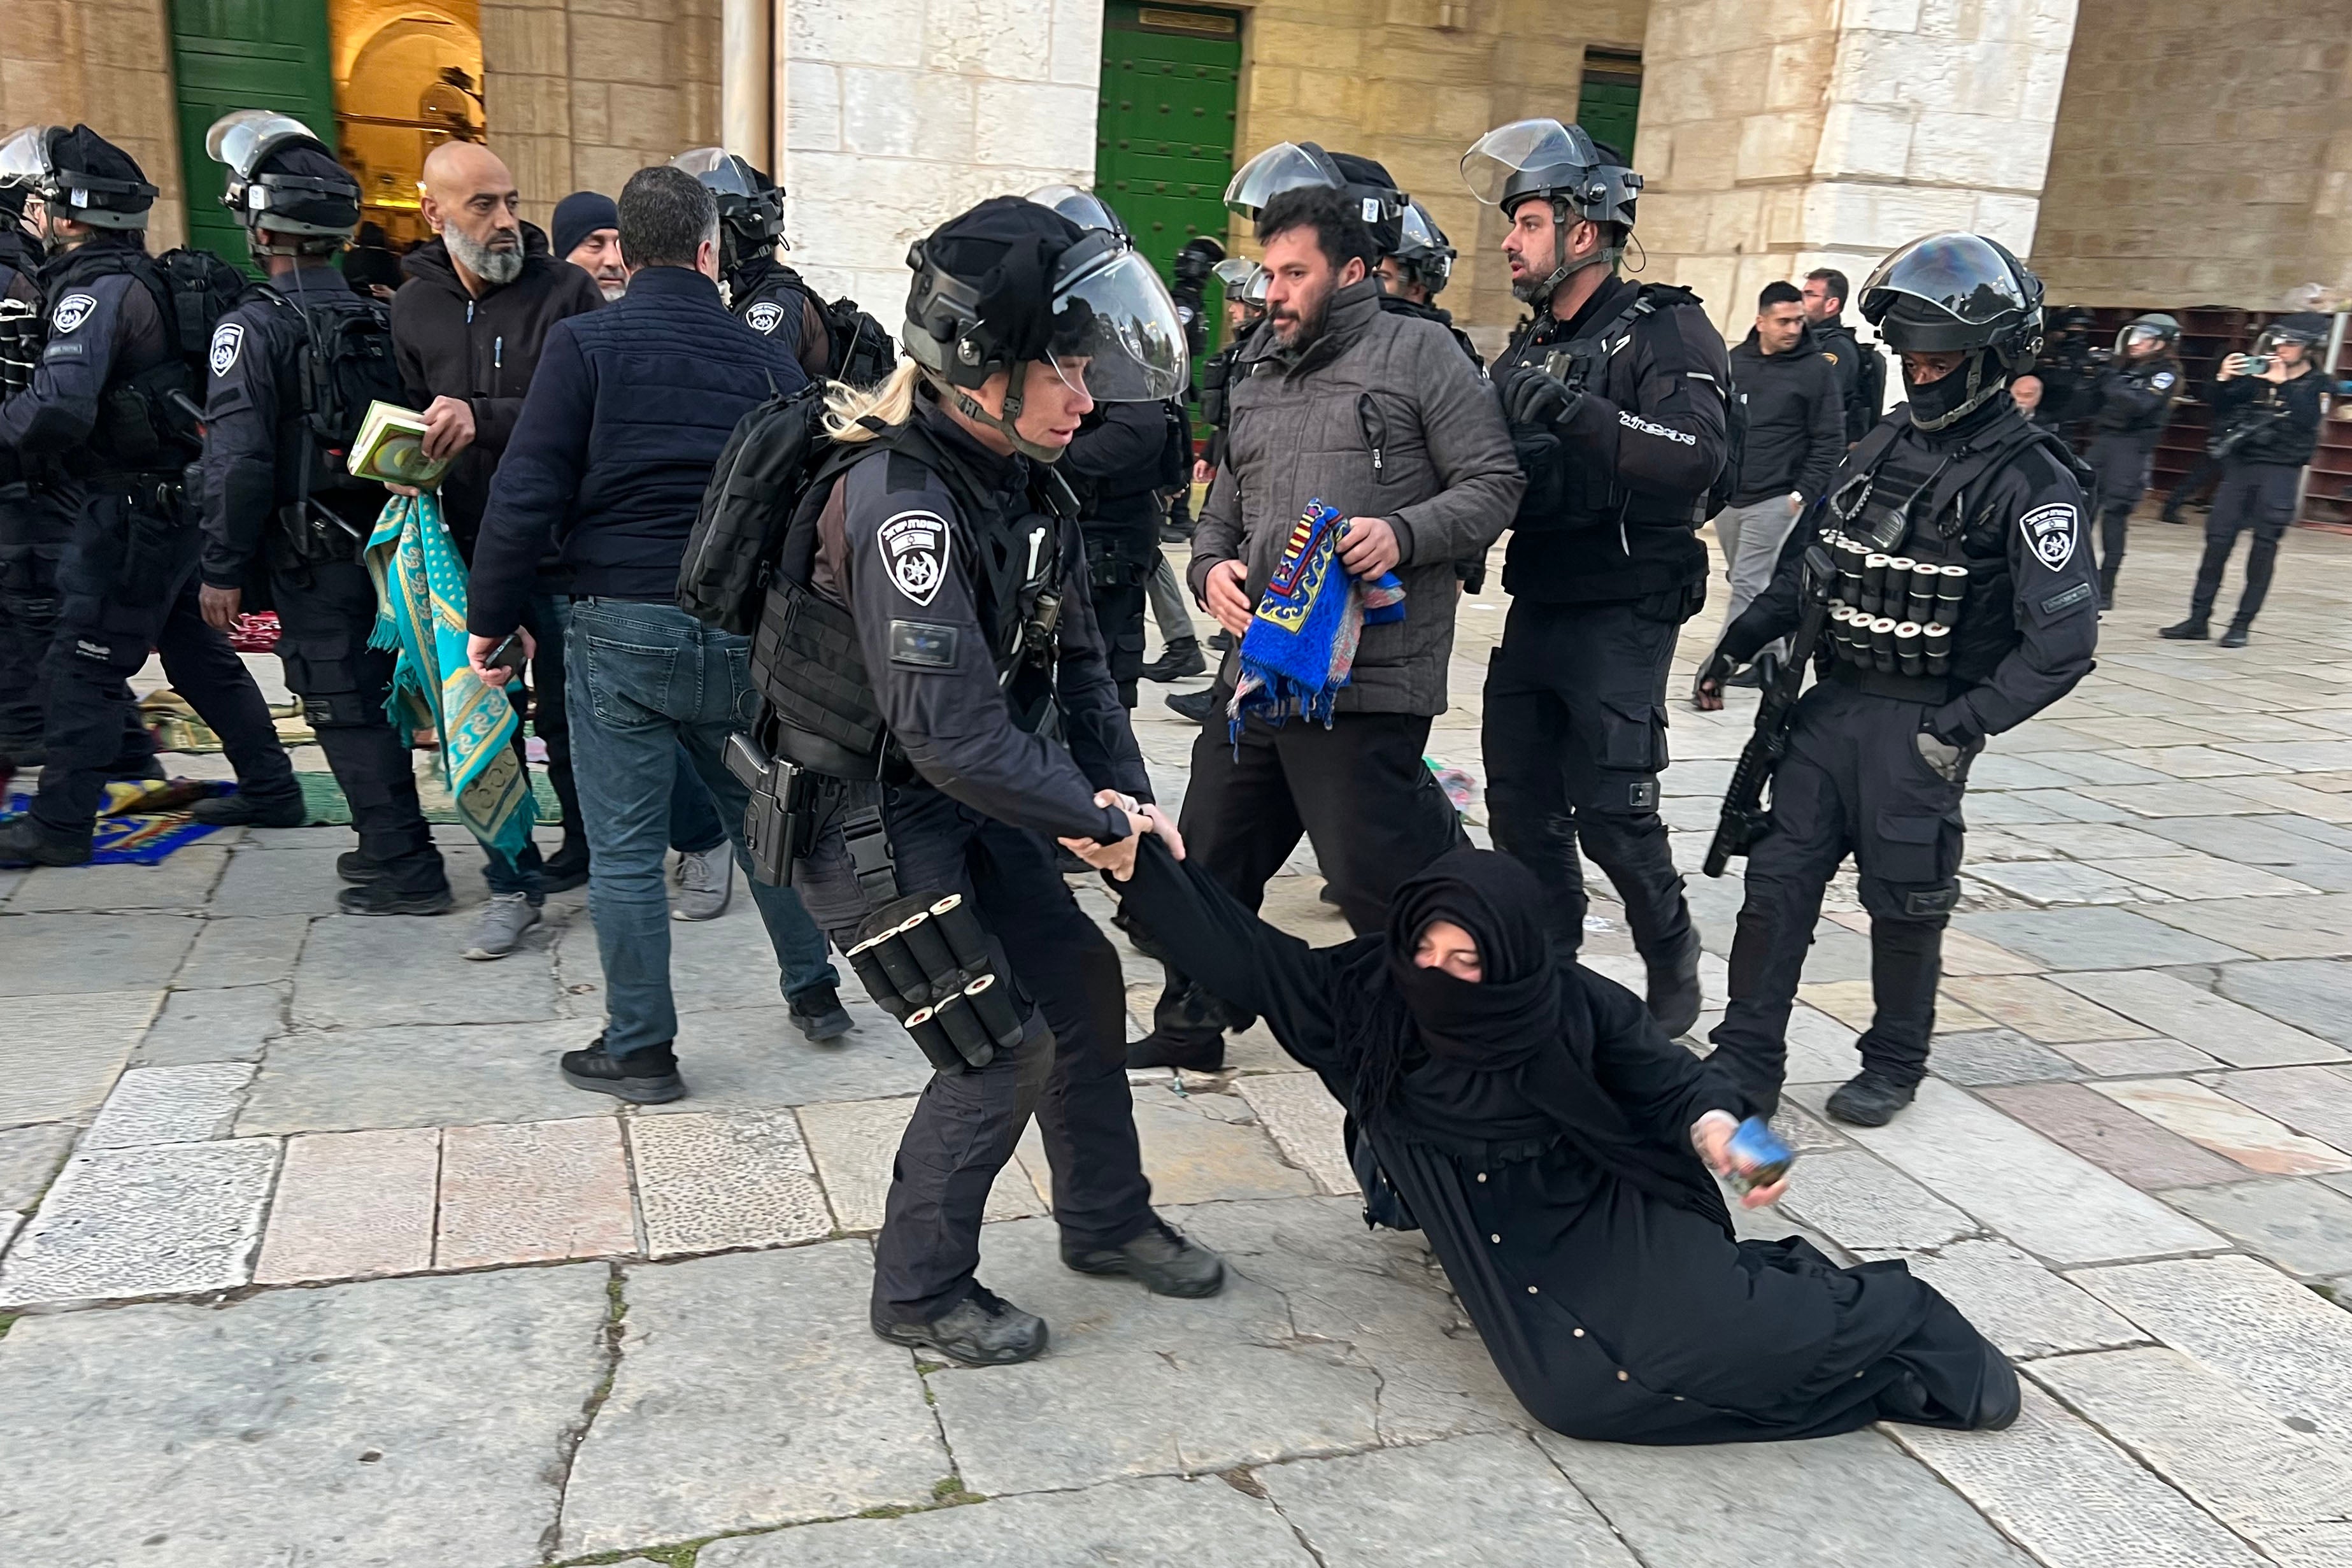 Israeli security forces remove Palestinian Muslim worshippers sitting on the grounds of the Al-Aqsa mosque compound in Jerusalem